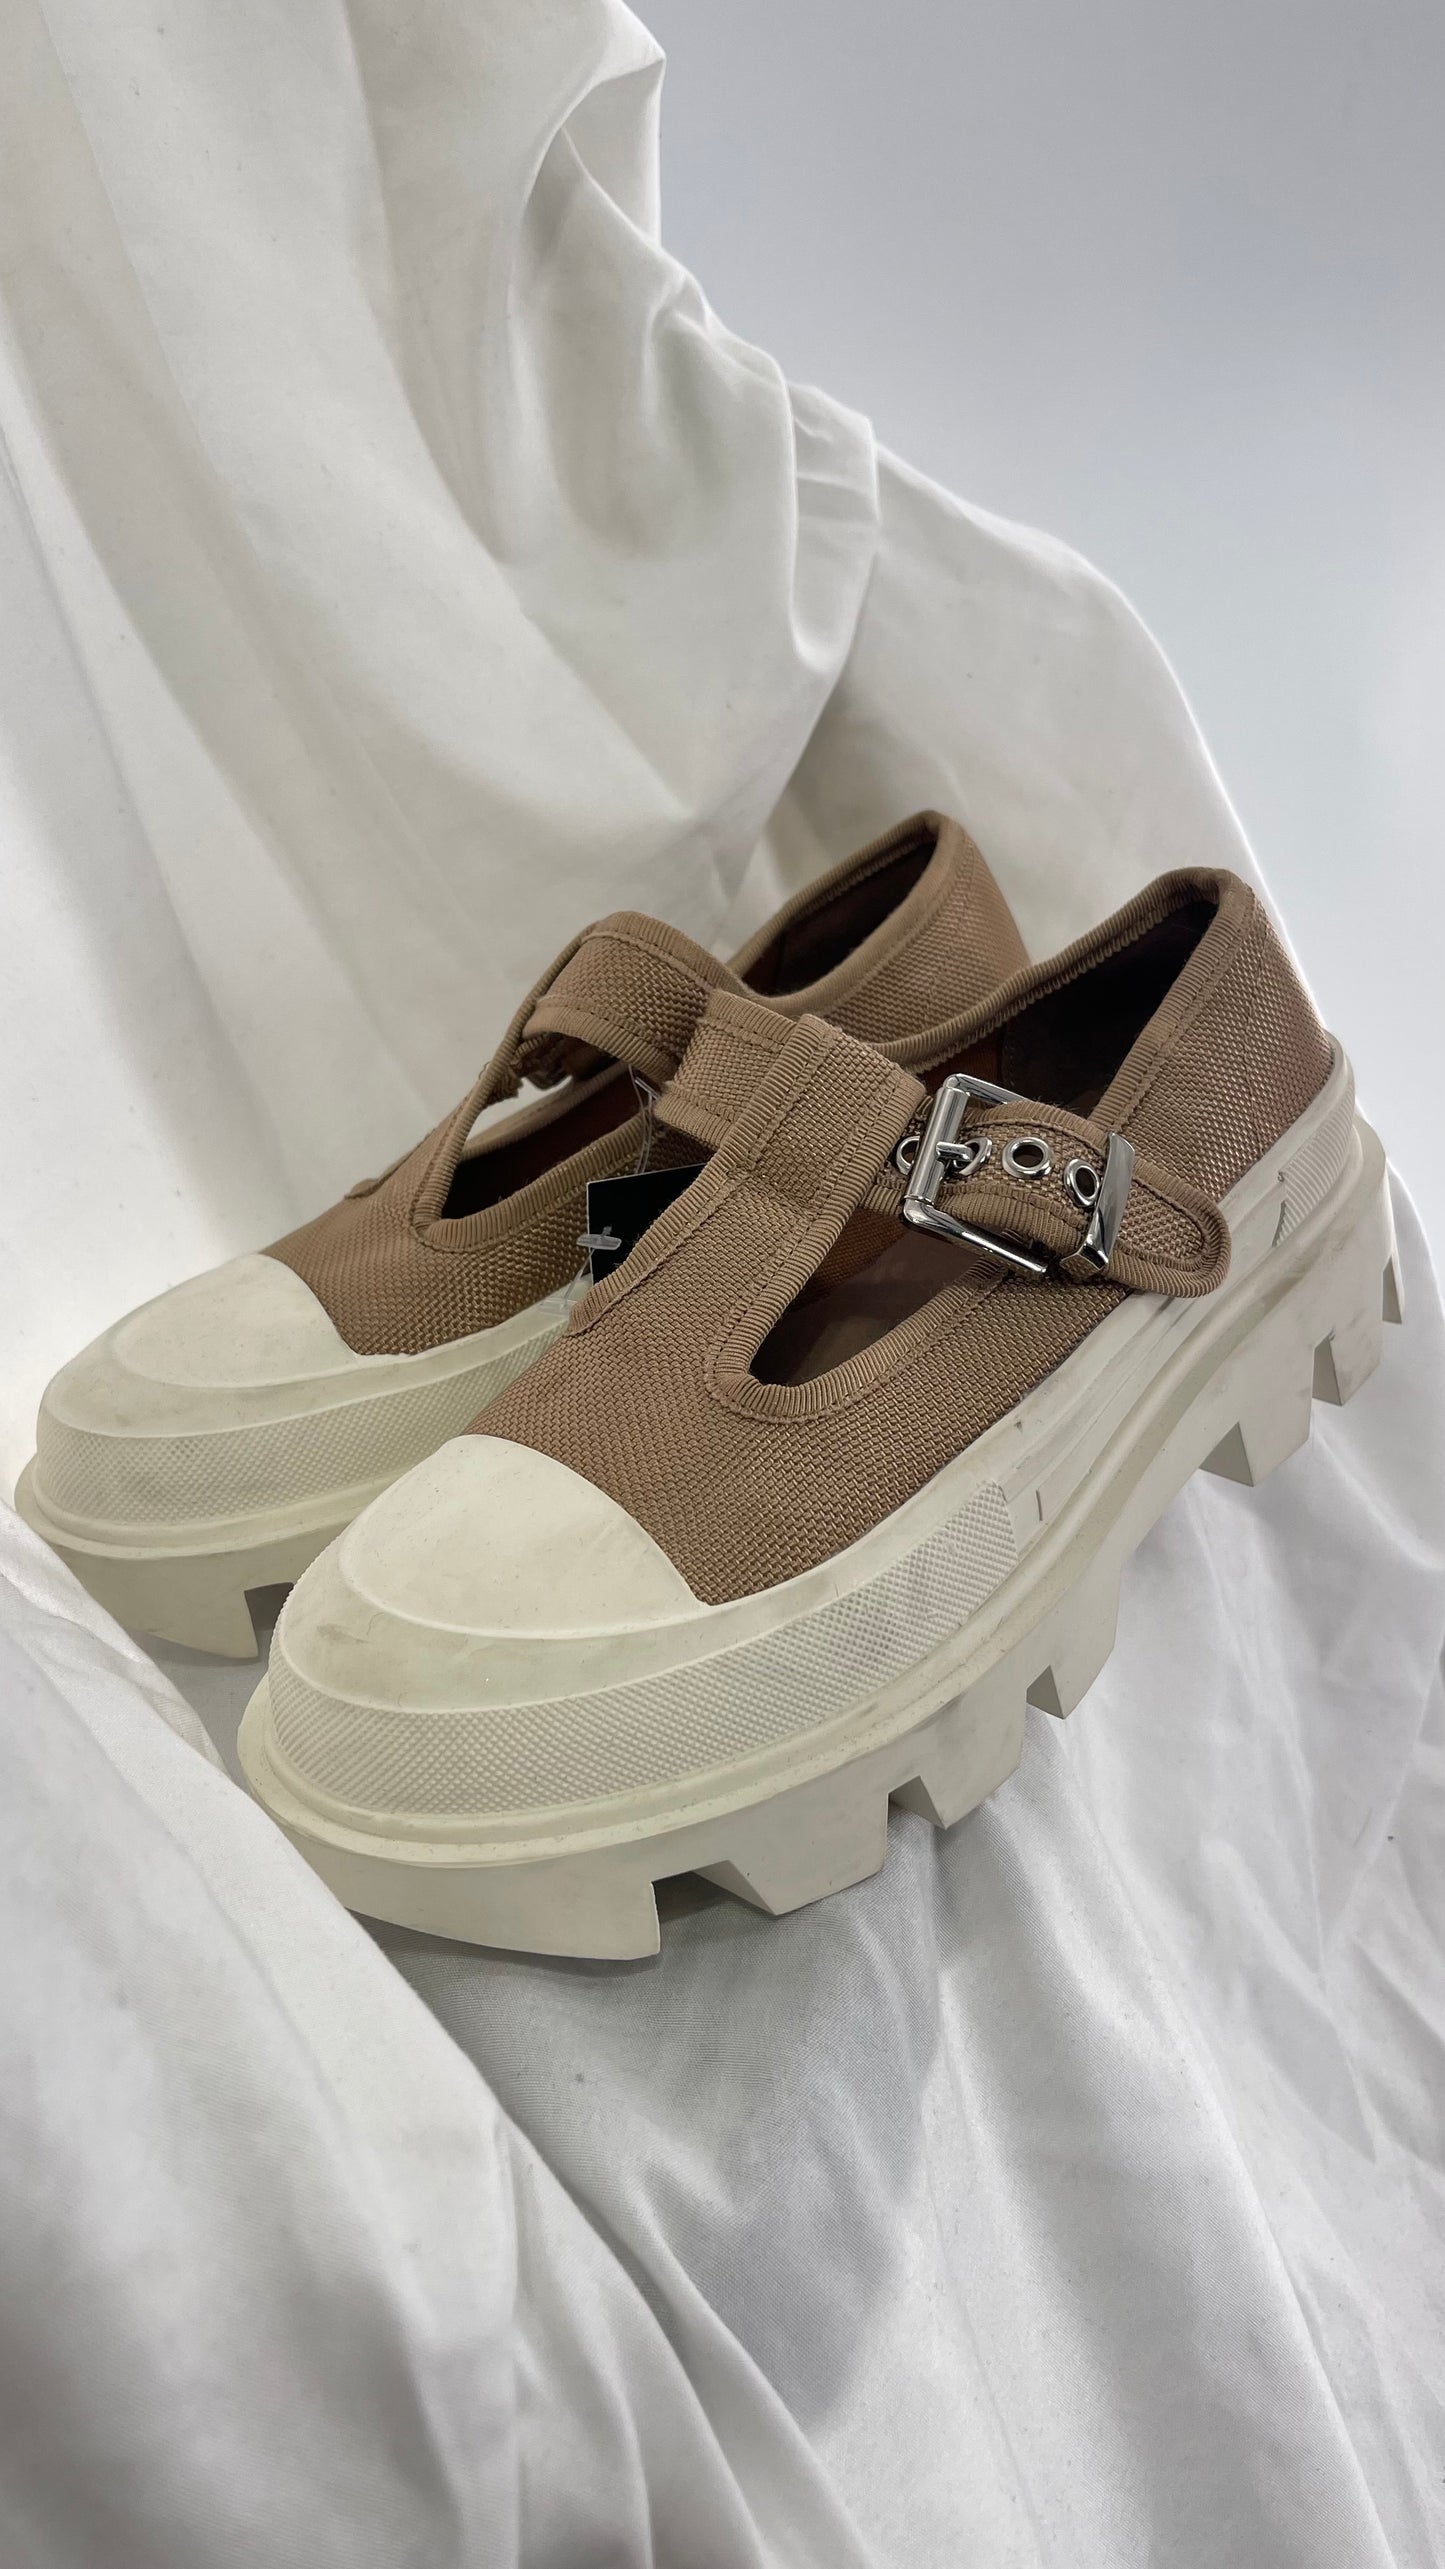 Jeffrey Campbell Marley Tan Canvas Mary Janes (6)